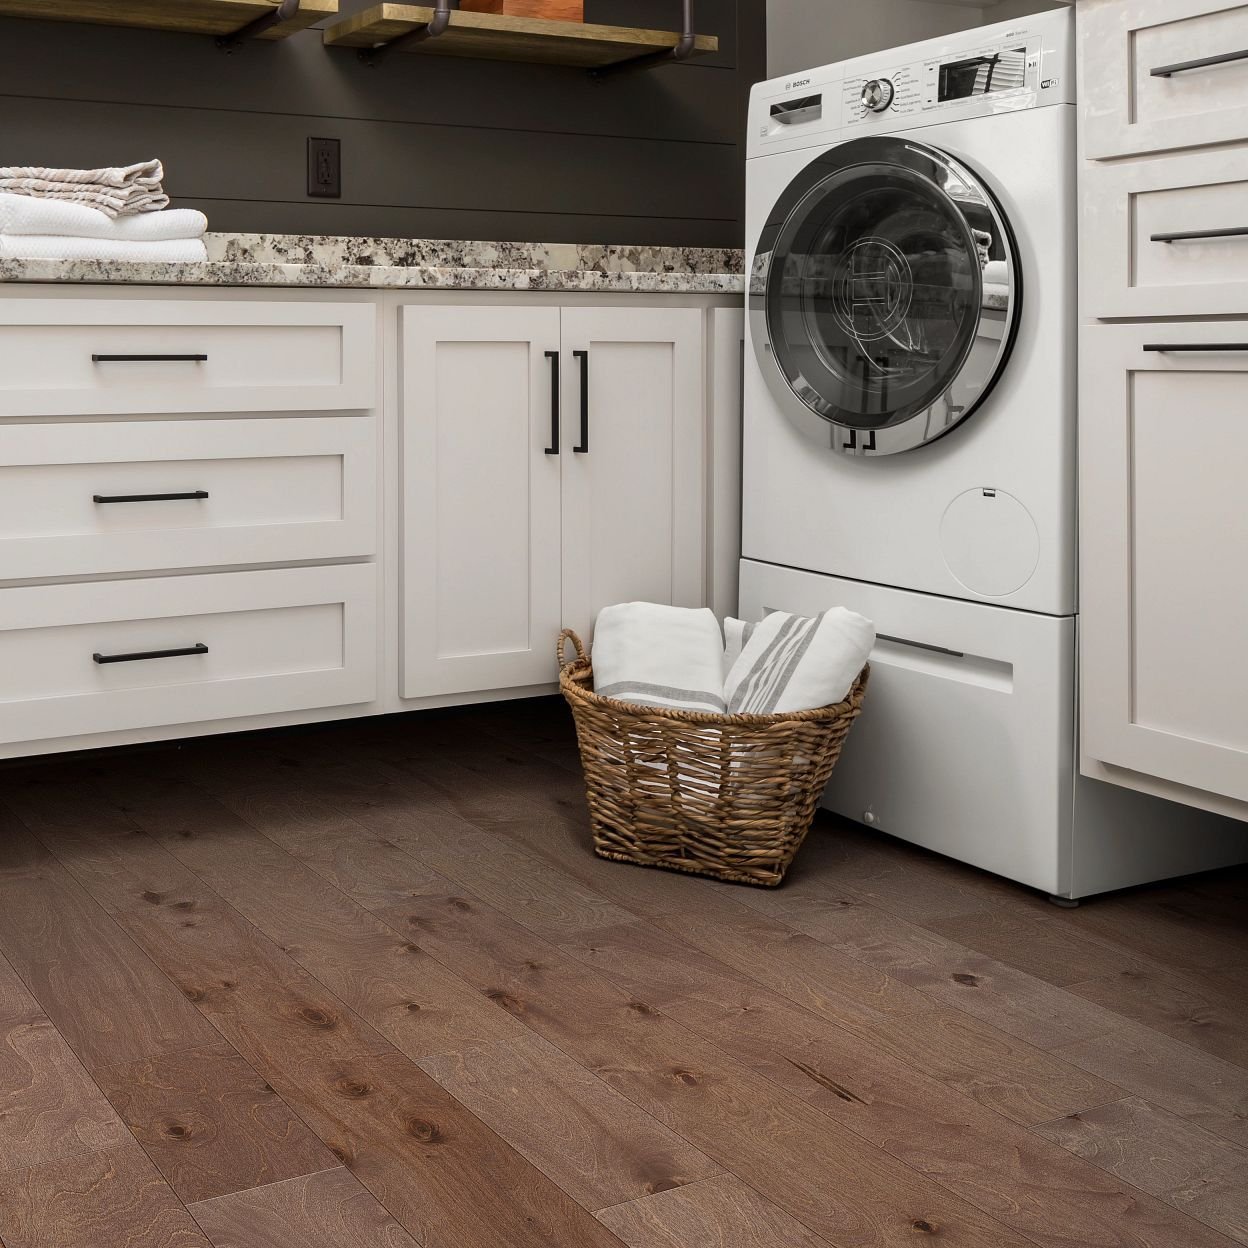 Laundry room with engineered hardwood flooring from 180 Degree Floors in the Nashville, TN area